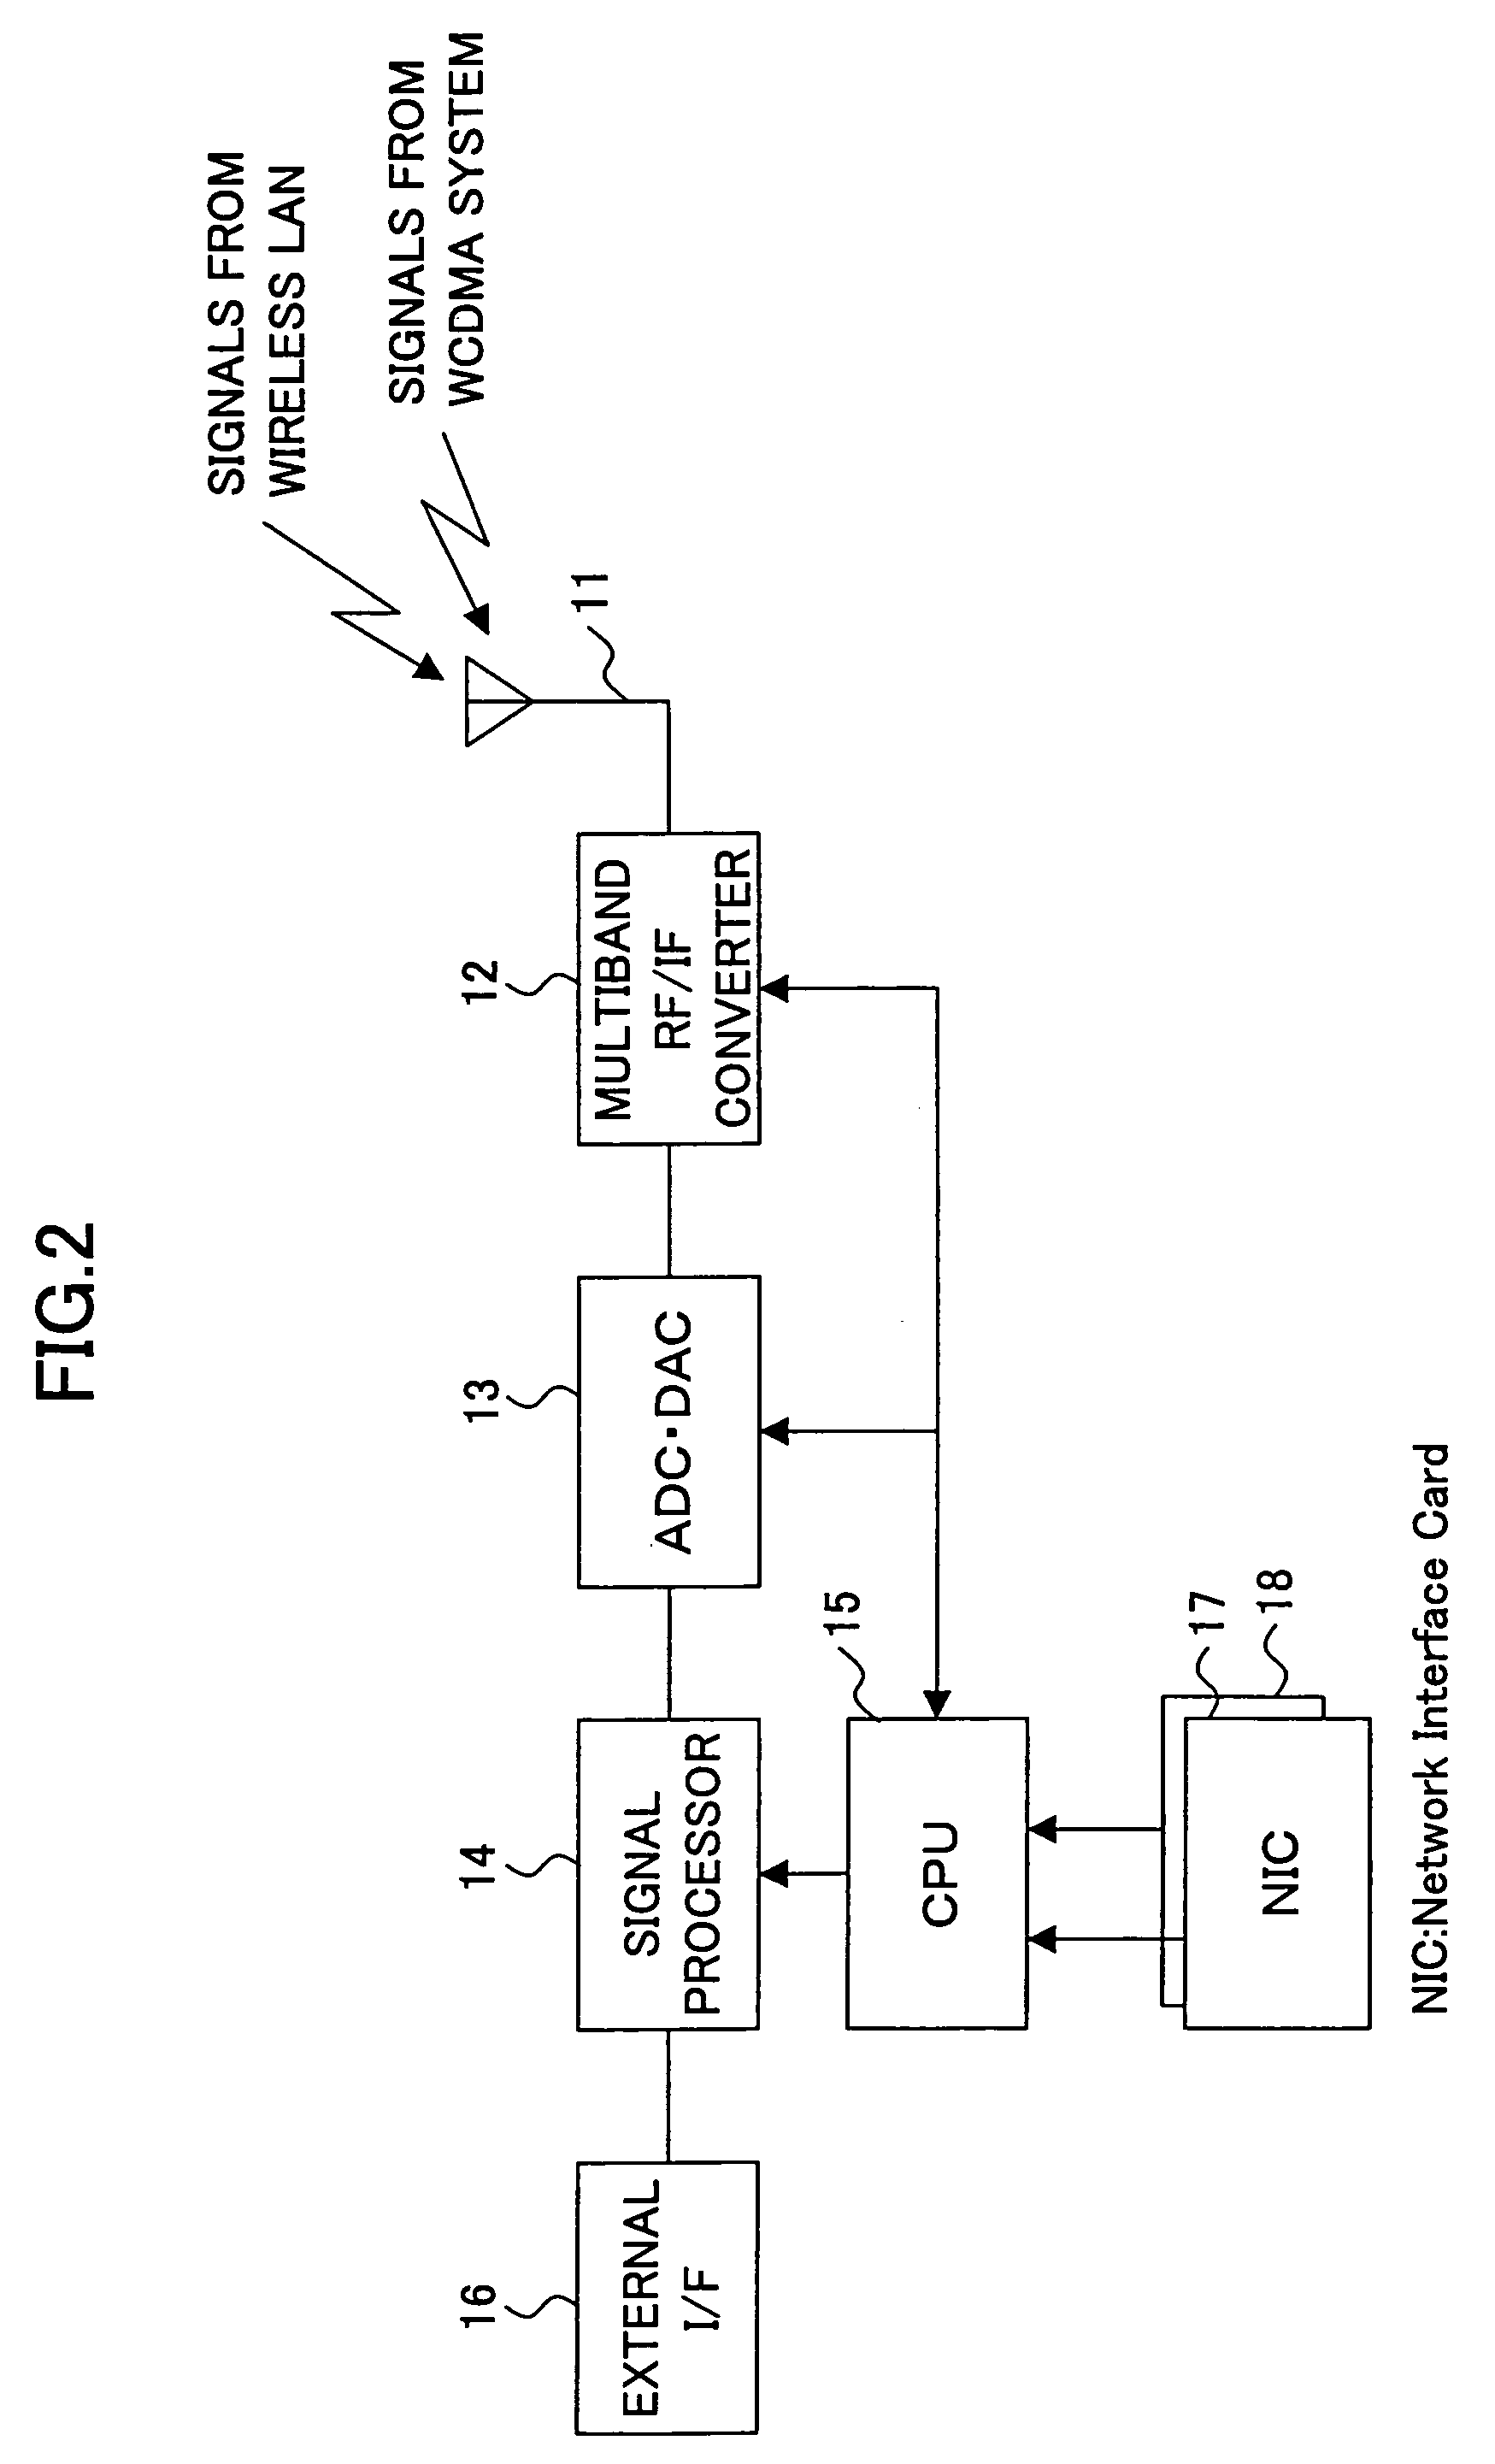 System and method for controlling network, network controlling apparatus, and mobile terminal used in network control system